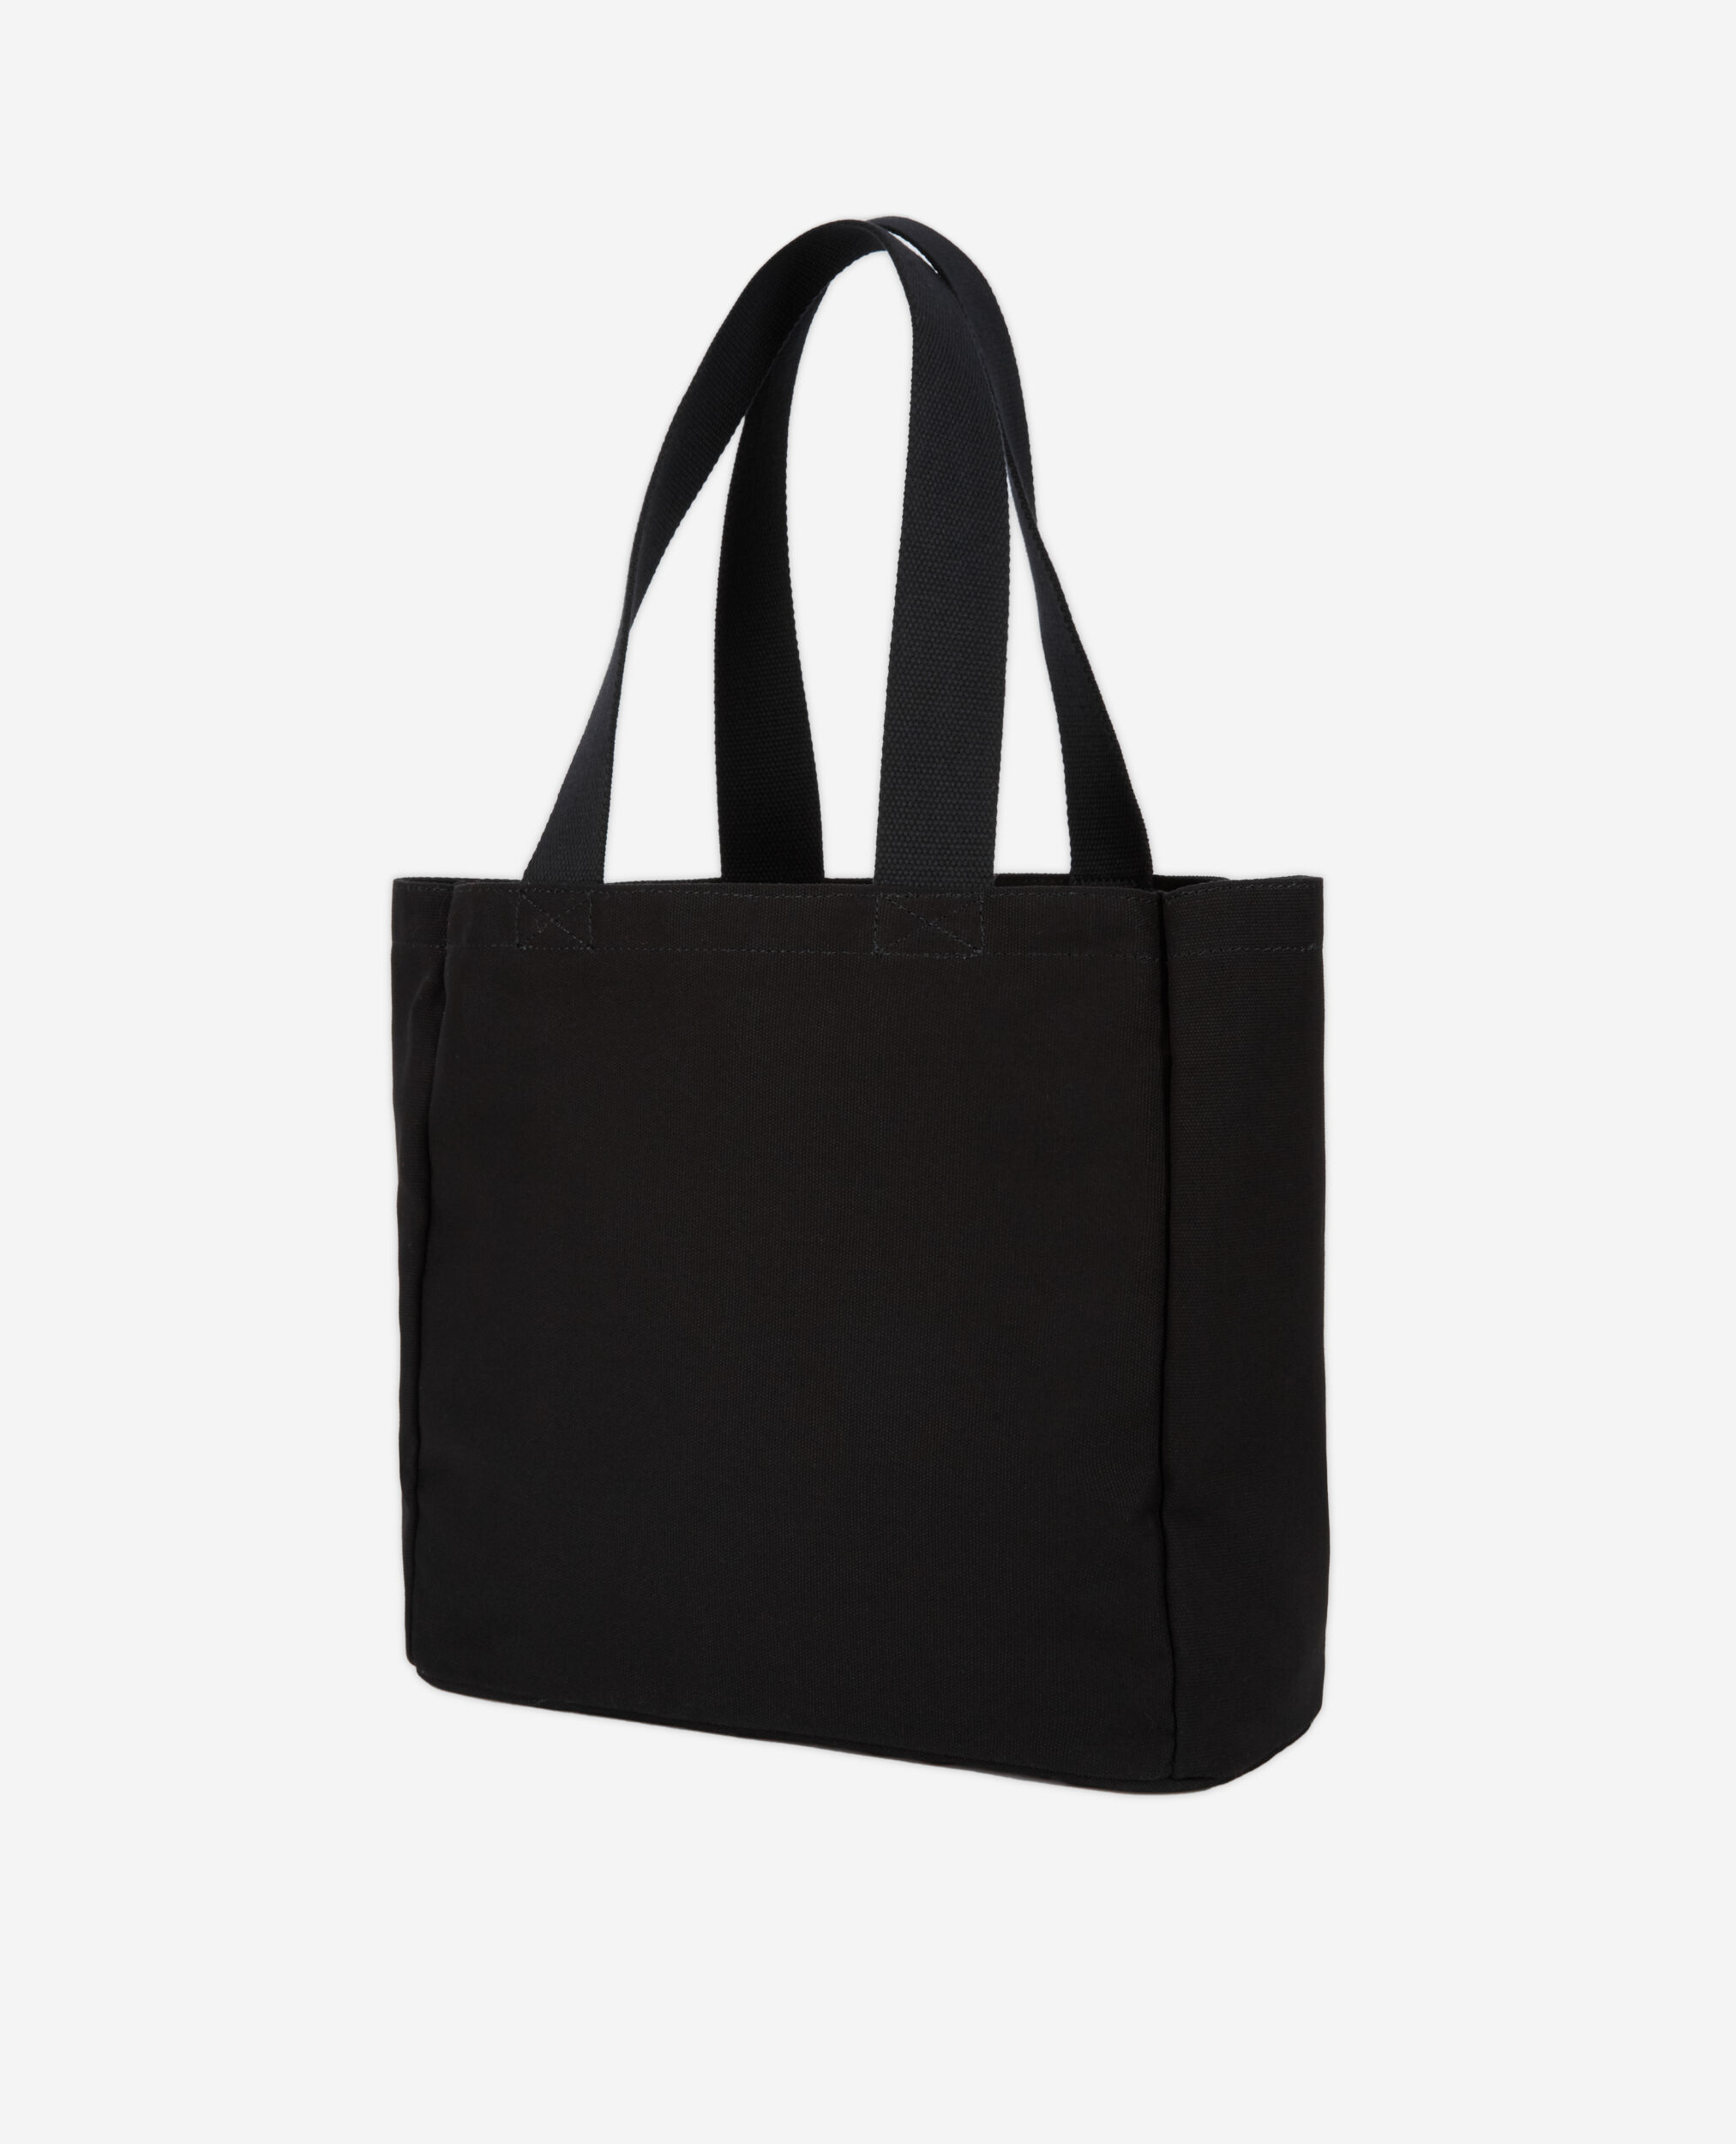 Small black tote bag with embroidery and logo | The Kooples - UK